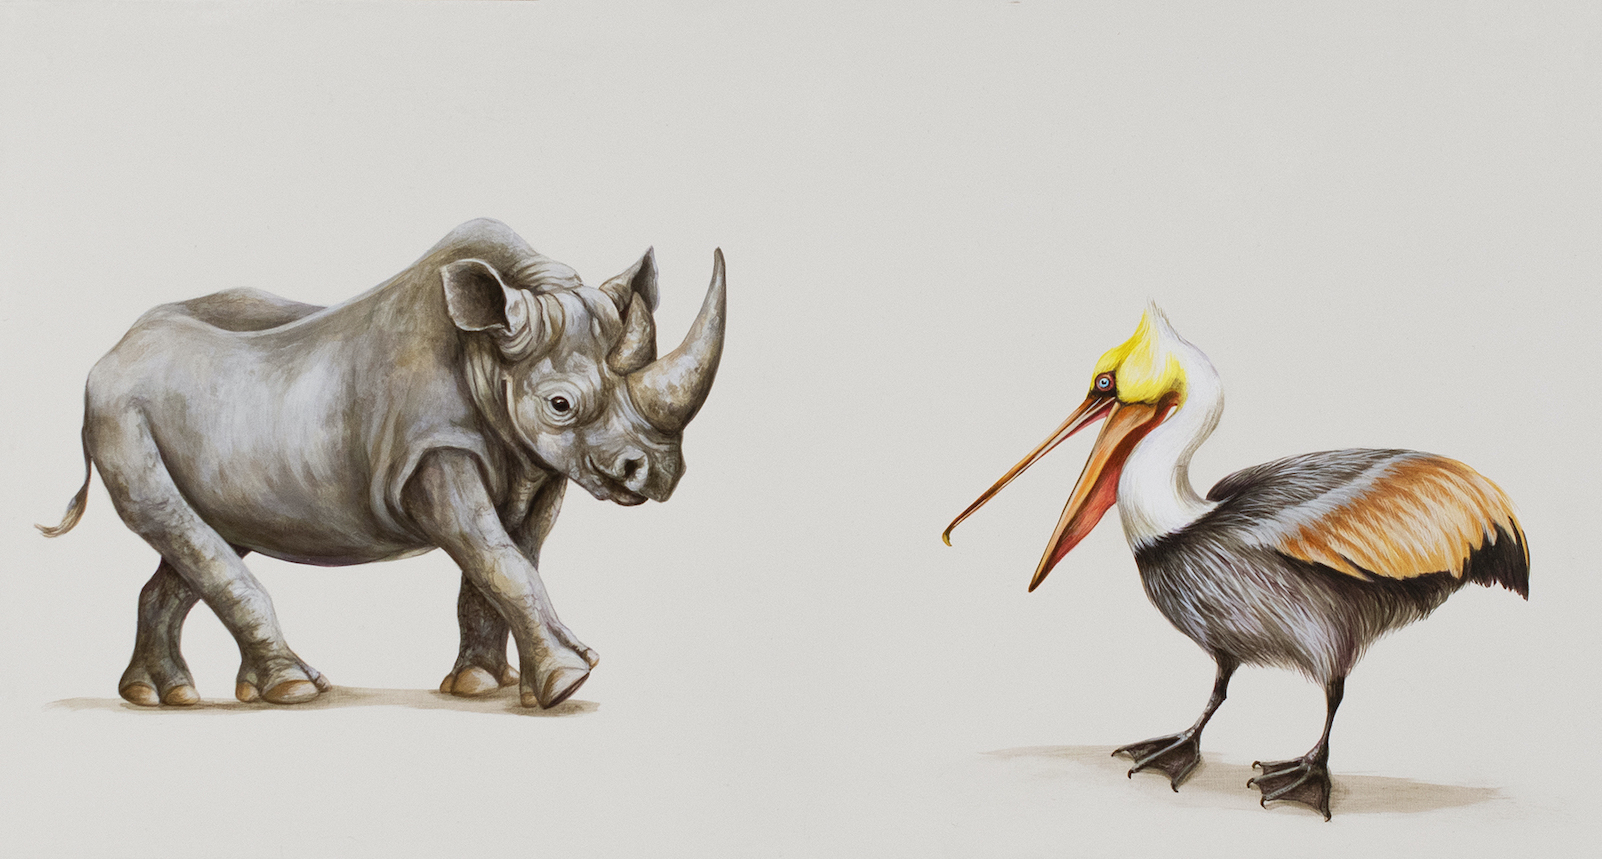 Tricia George: The Rhino and The Brown Pelican